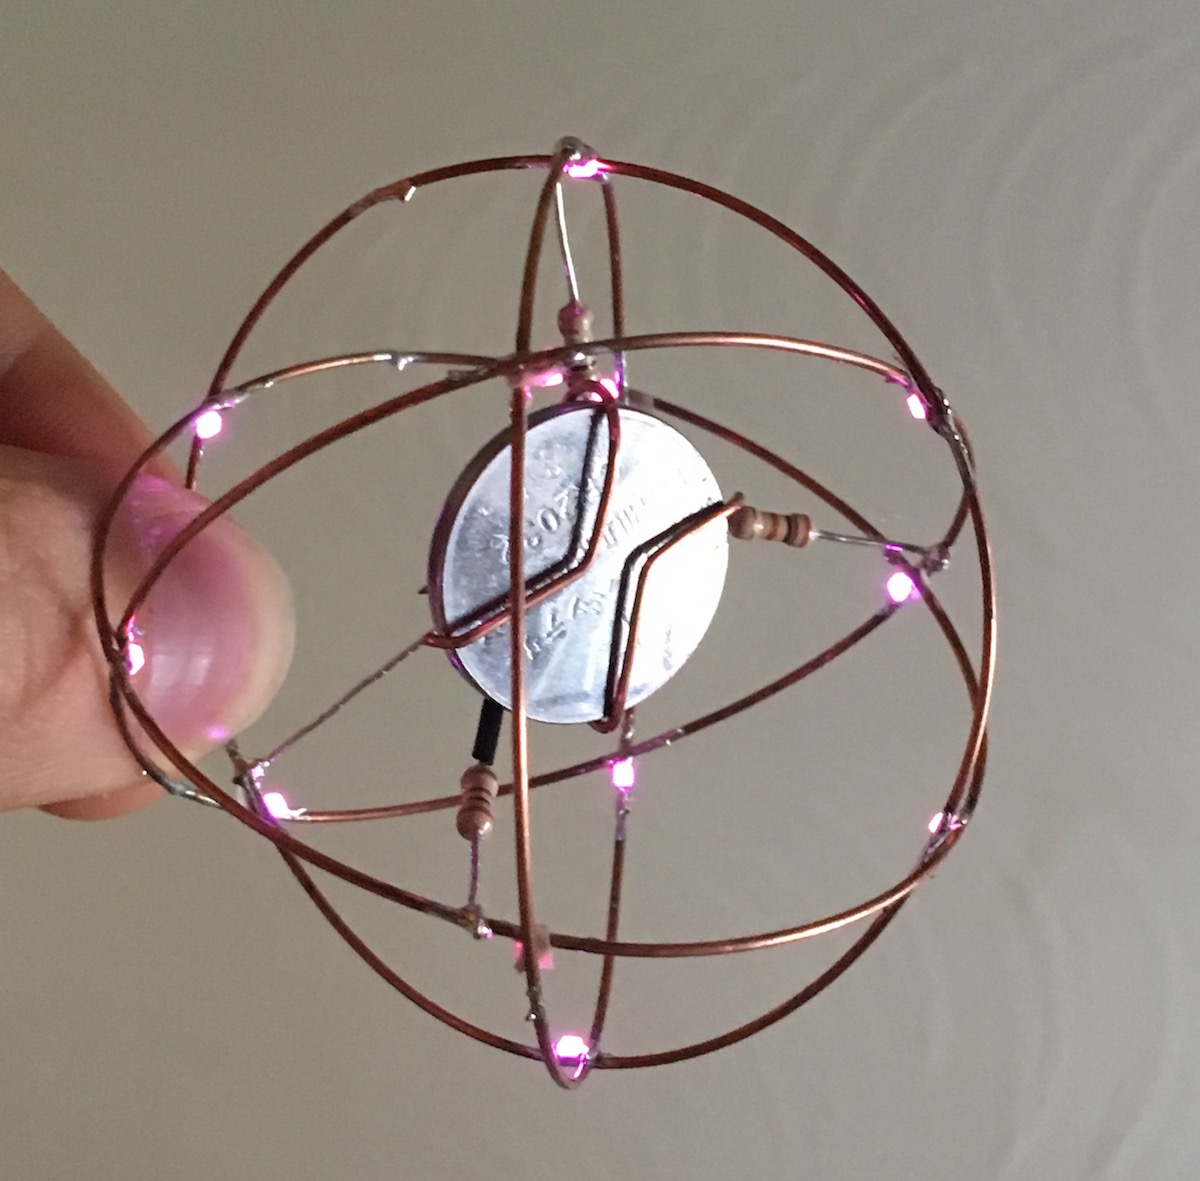 small metal sculpture made of four circular rings connected with glowing pink LEDs. a coin-cell battery is suspended in the centre by resistors. It's a glowy sparkly ball and here's another hint, this project goes in a touch-sensing interactive lil friend direction :)